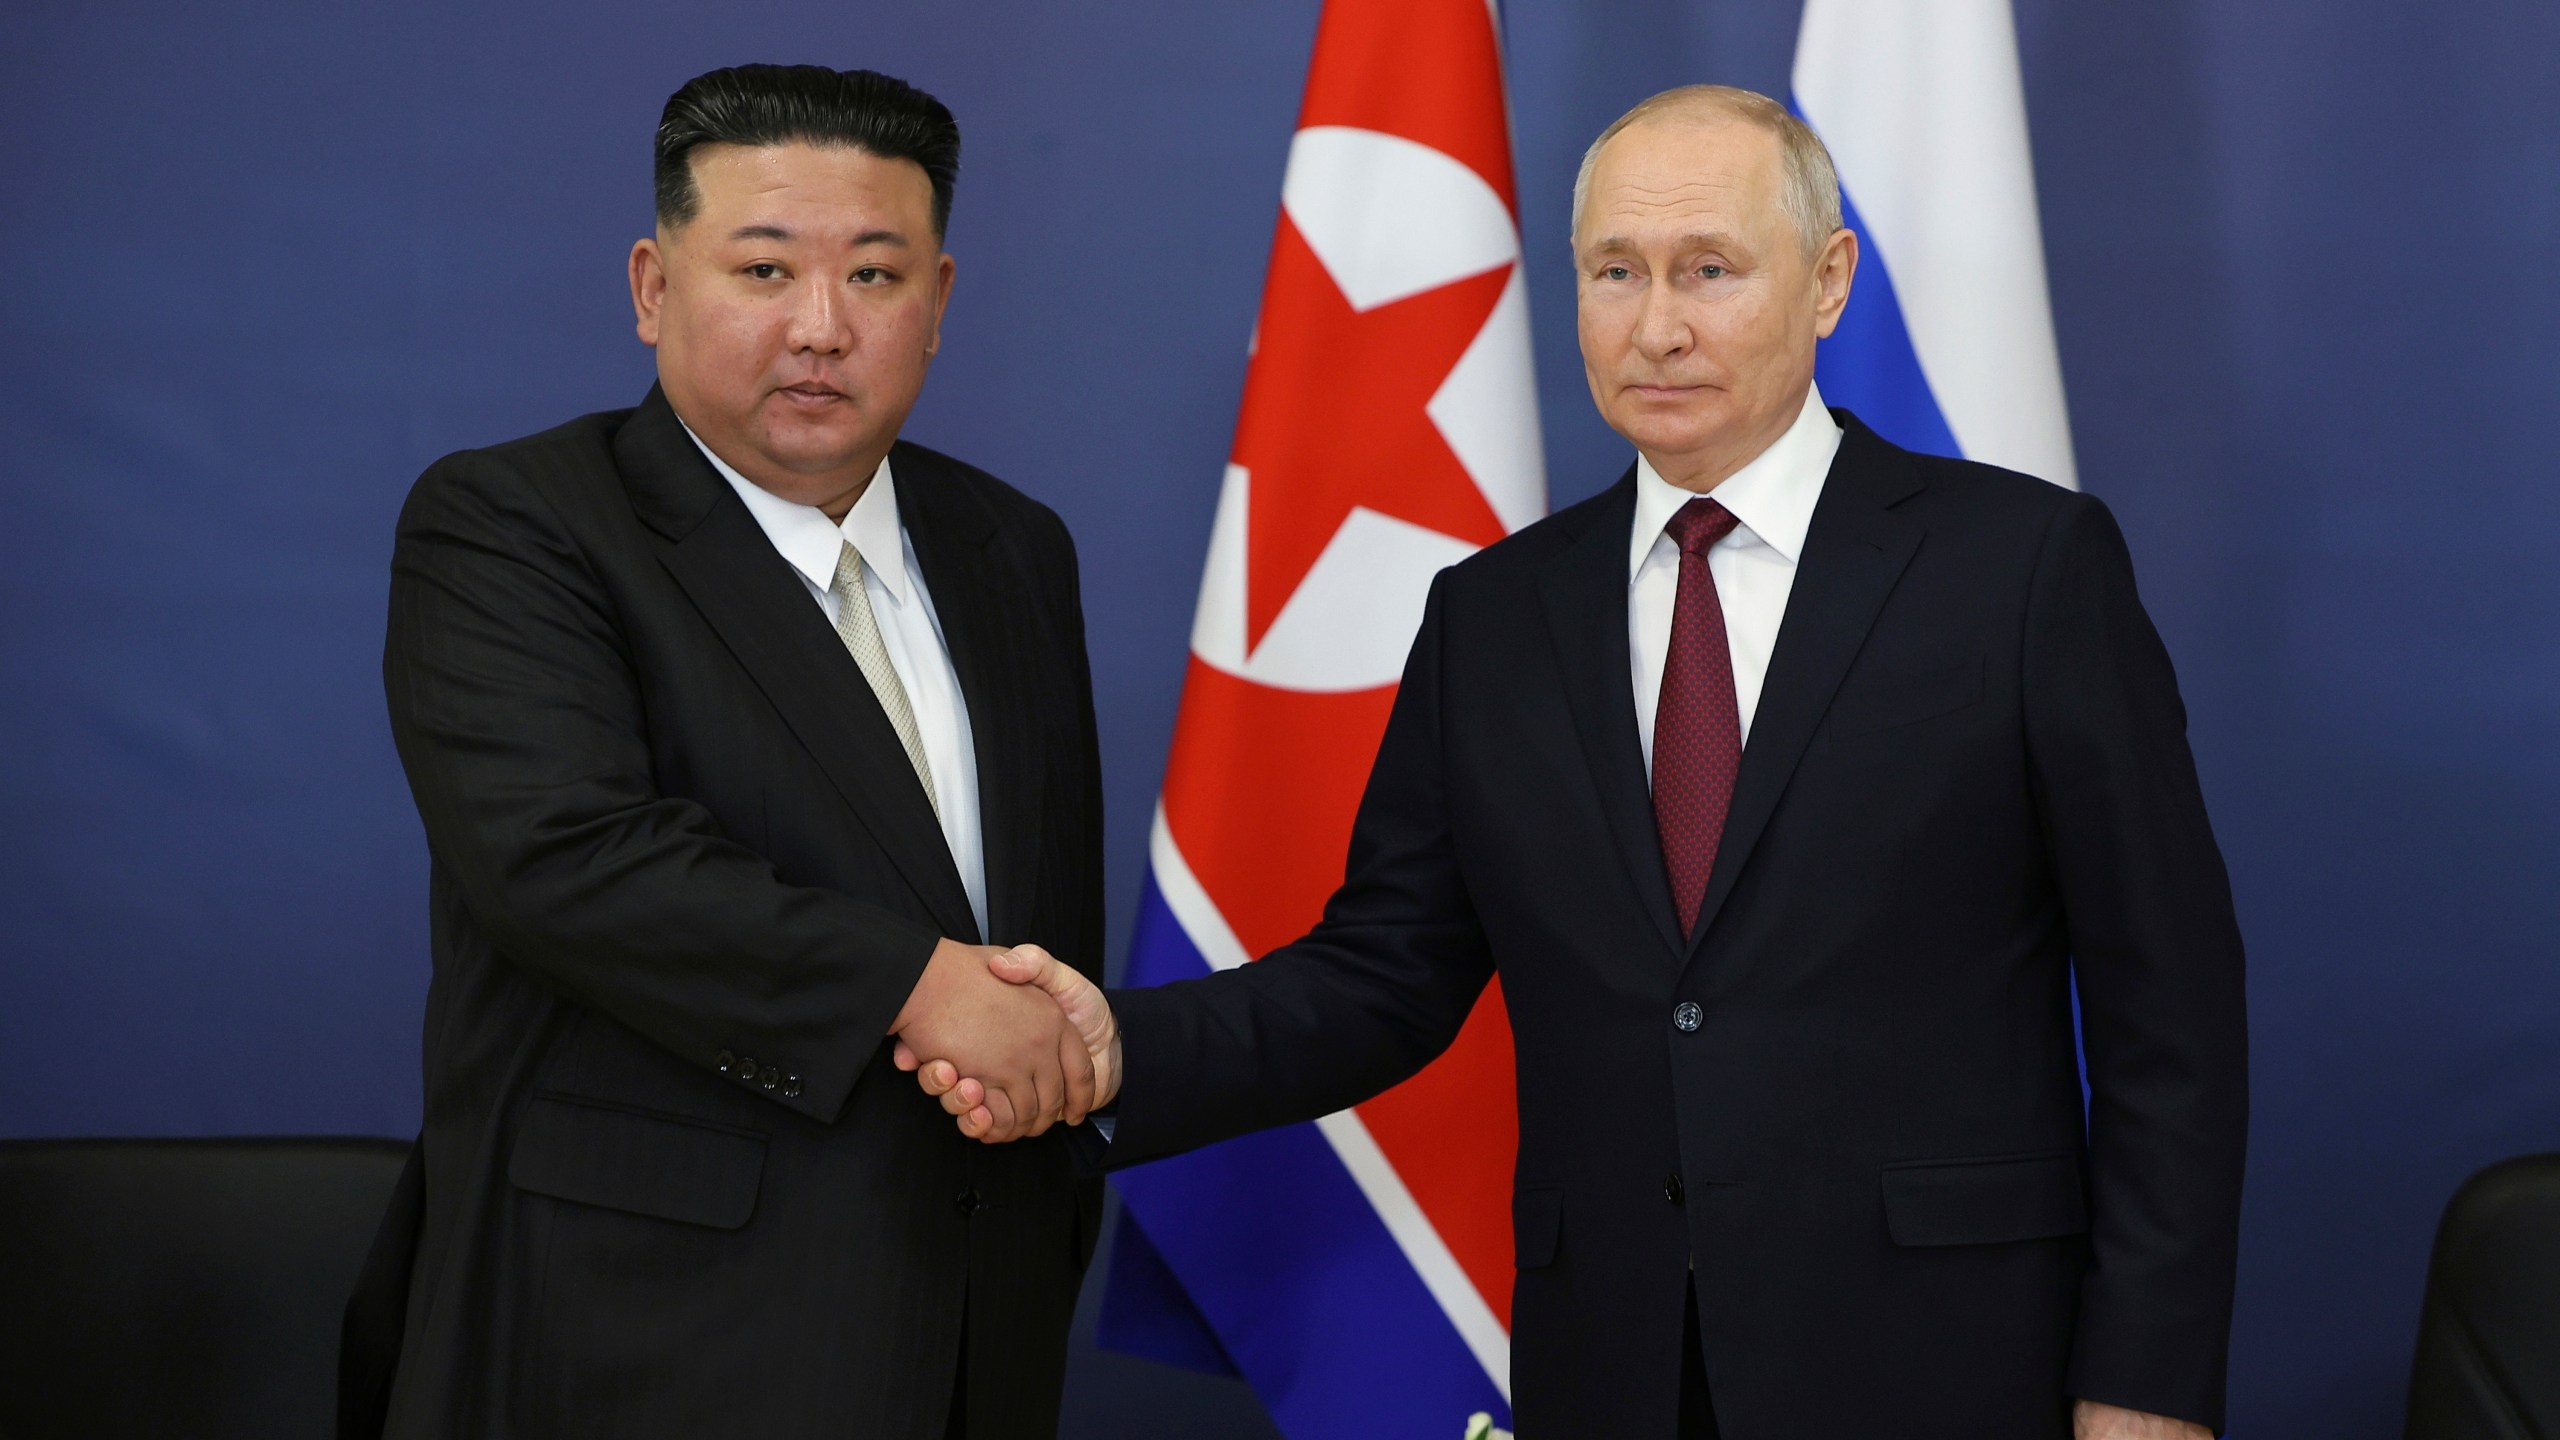 FILE - Russian President Vladimir Putin, right, and North Korean leader Kim Jong Un shake hands during their meeting at the Vostochny cosmodrome outside the city of Tsiolkovsky, about 200 kilometers (125 miles) from the city of Blagoveshchensk in the far eastern Amur region, Russia, Sept. 13, 2023. Kim used a Russian luxury limousine gifted by Putin recently, Kim’s sister said Saturday, March 16, 2024, praising the car’s “special function” and the two countries' deepening bilateral ties. (Vladimir Smirnov/Sputnik Kremlin Pool Photo via AP, File)